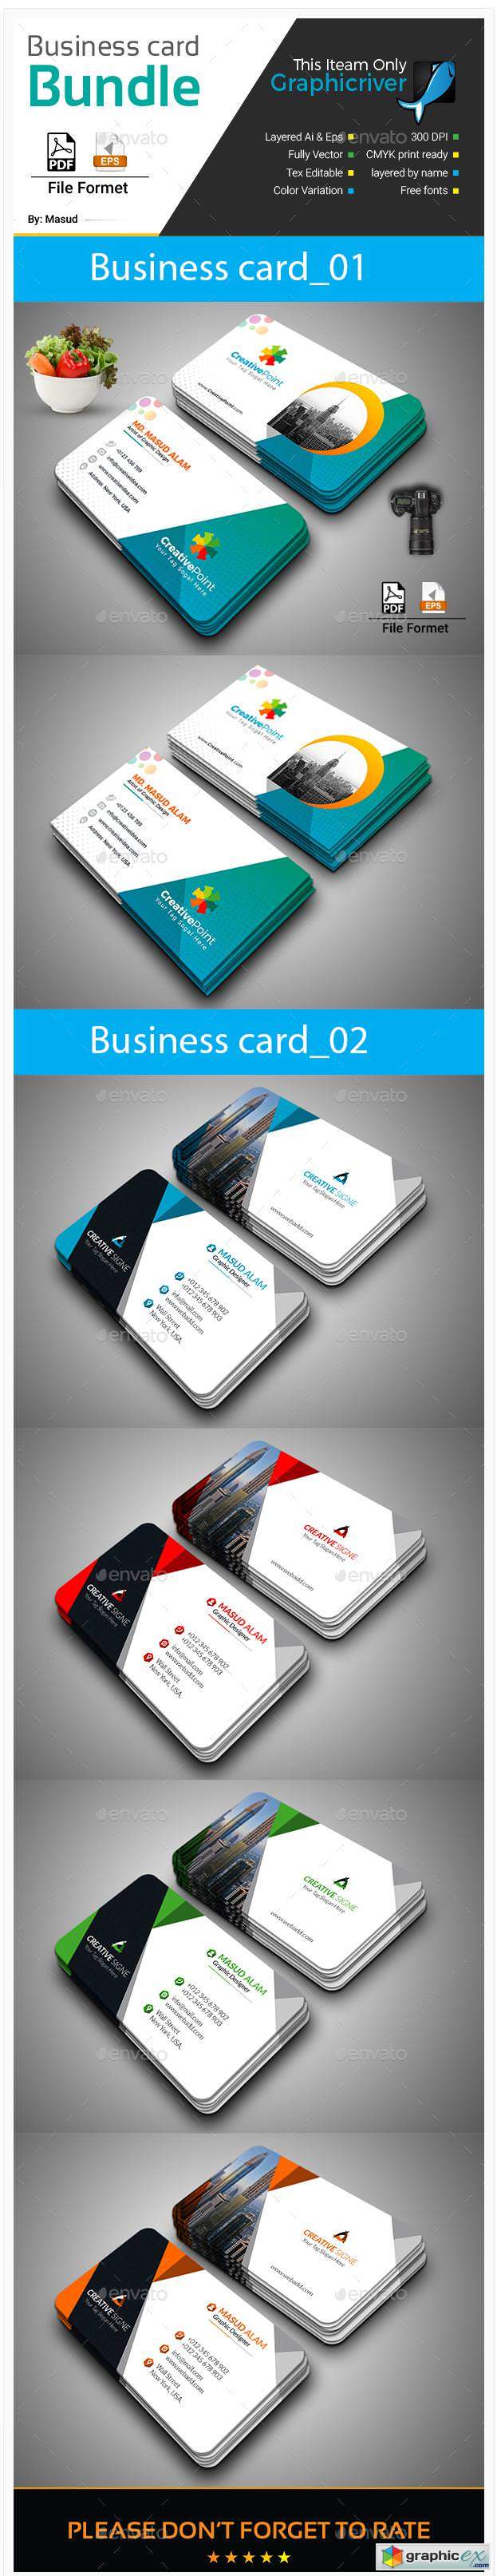 Business Card Bundle 2 in 1 22188736